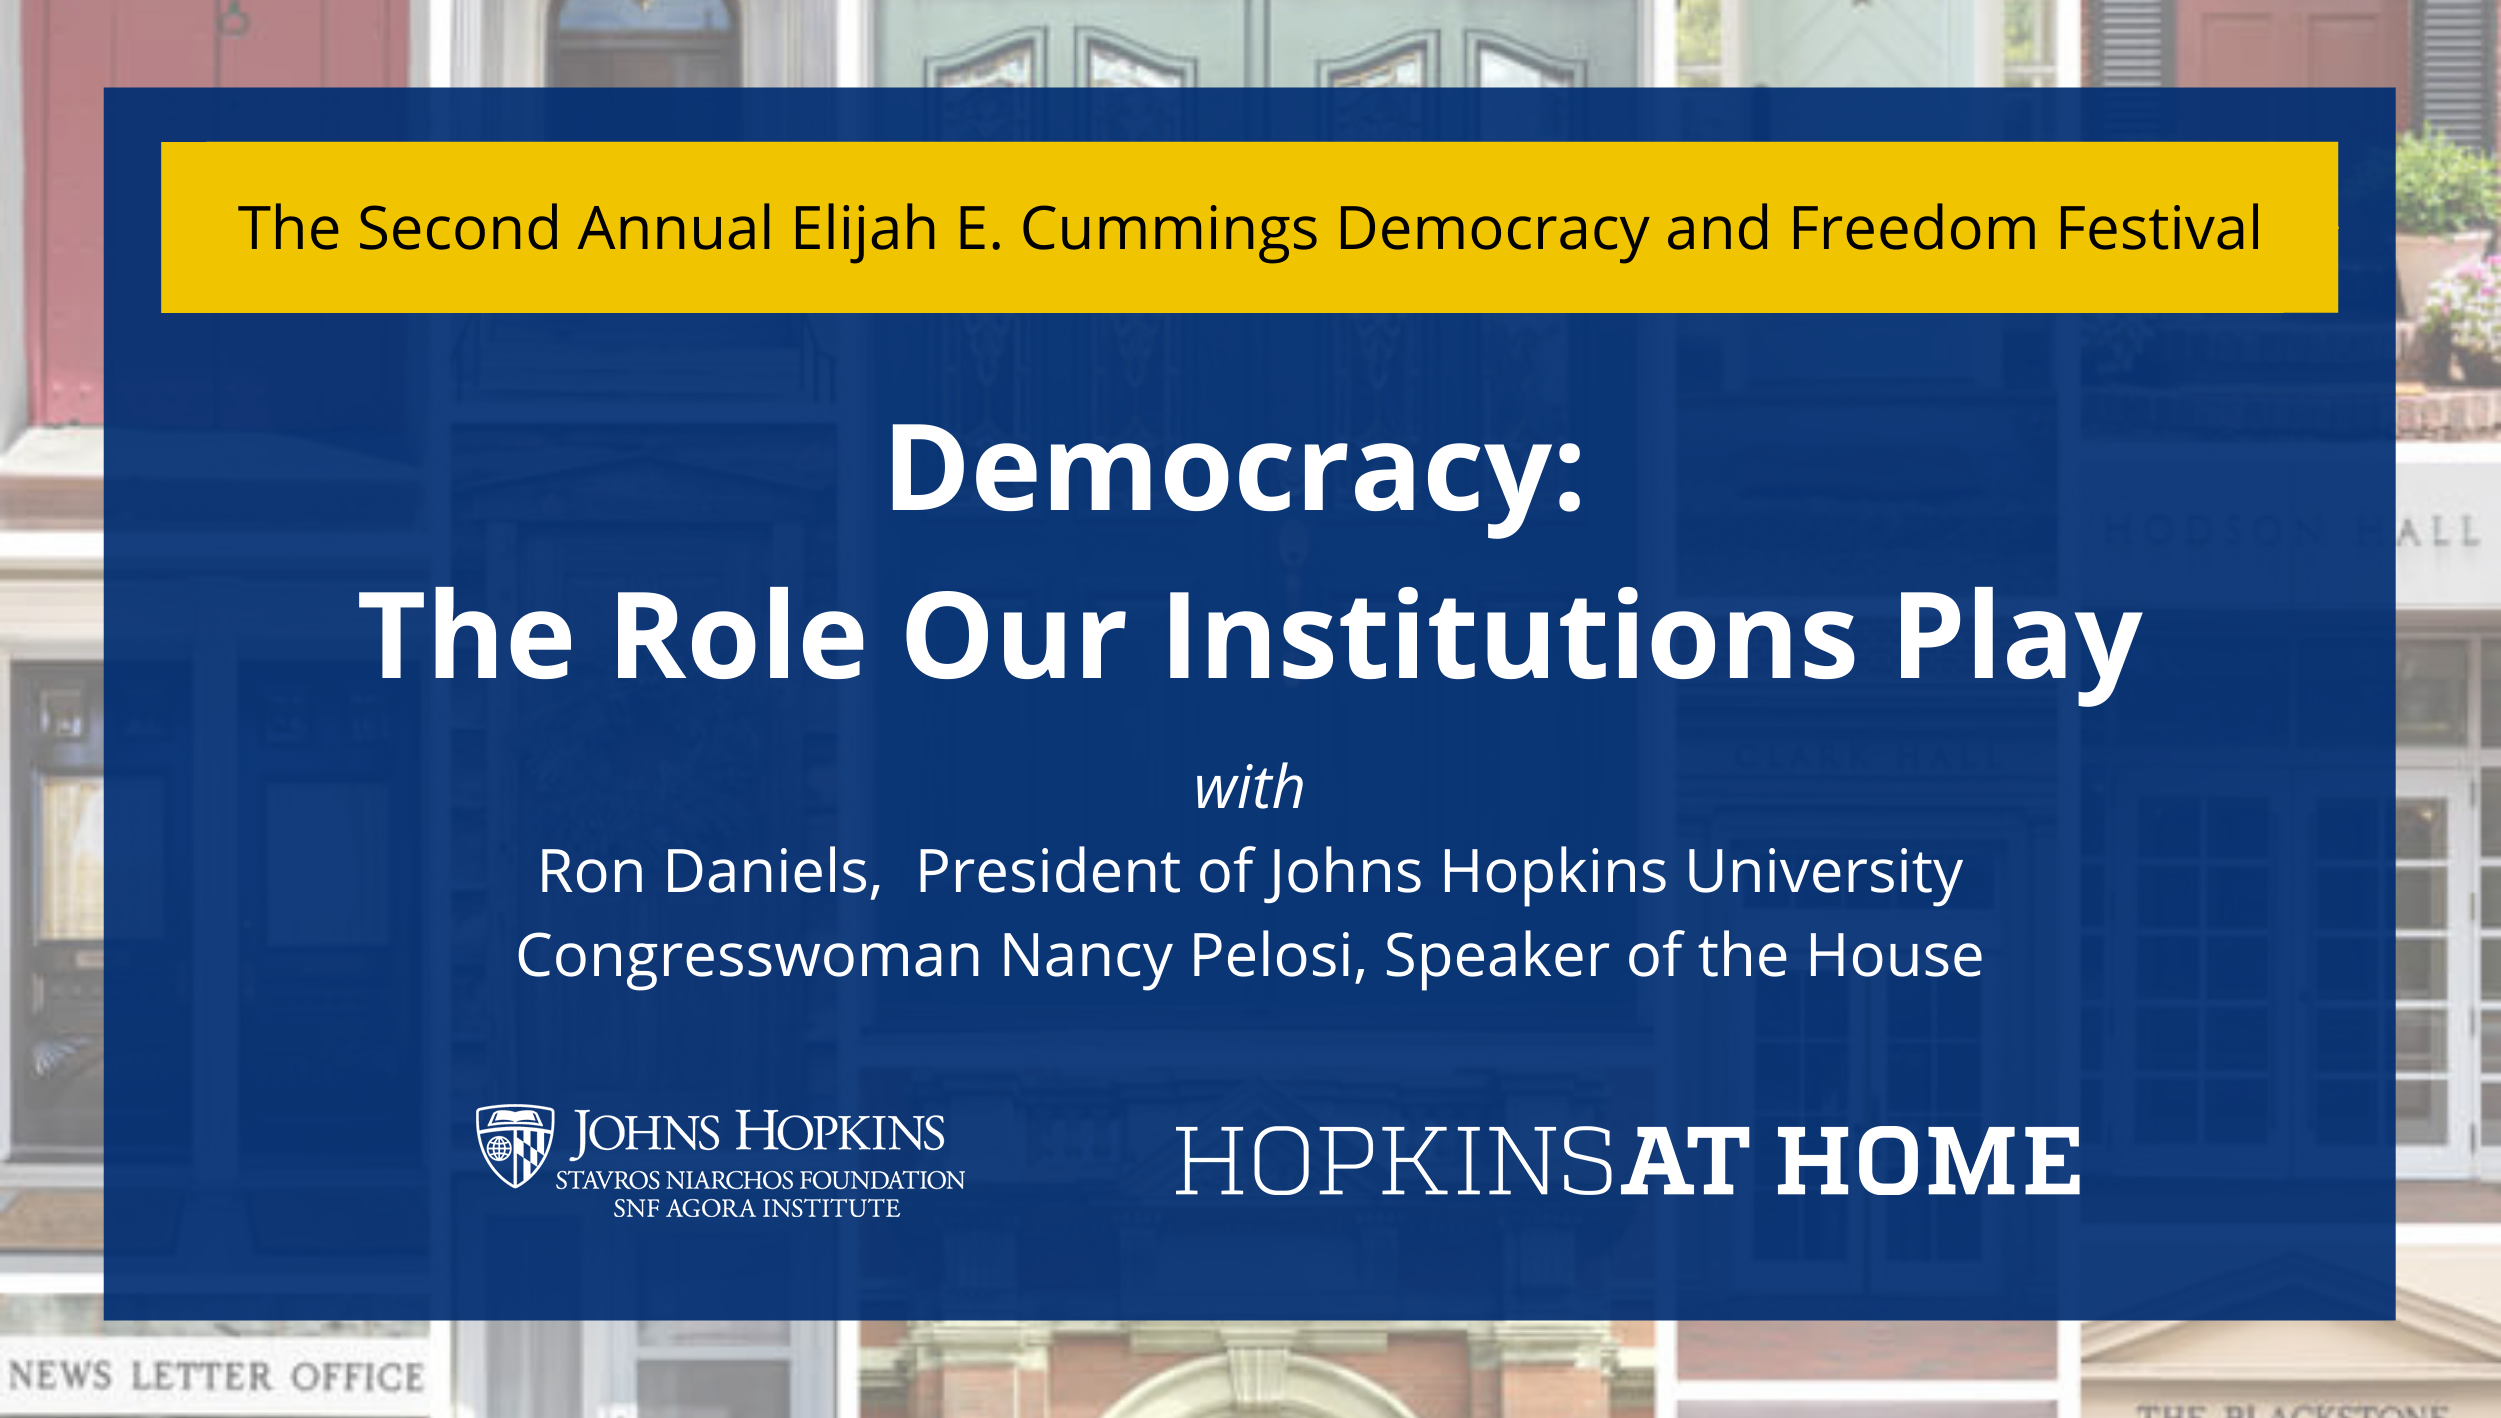 Democracy: The Role Our Institutions Play